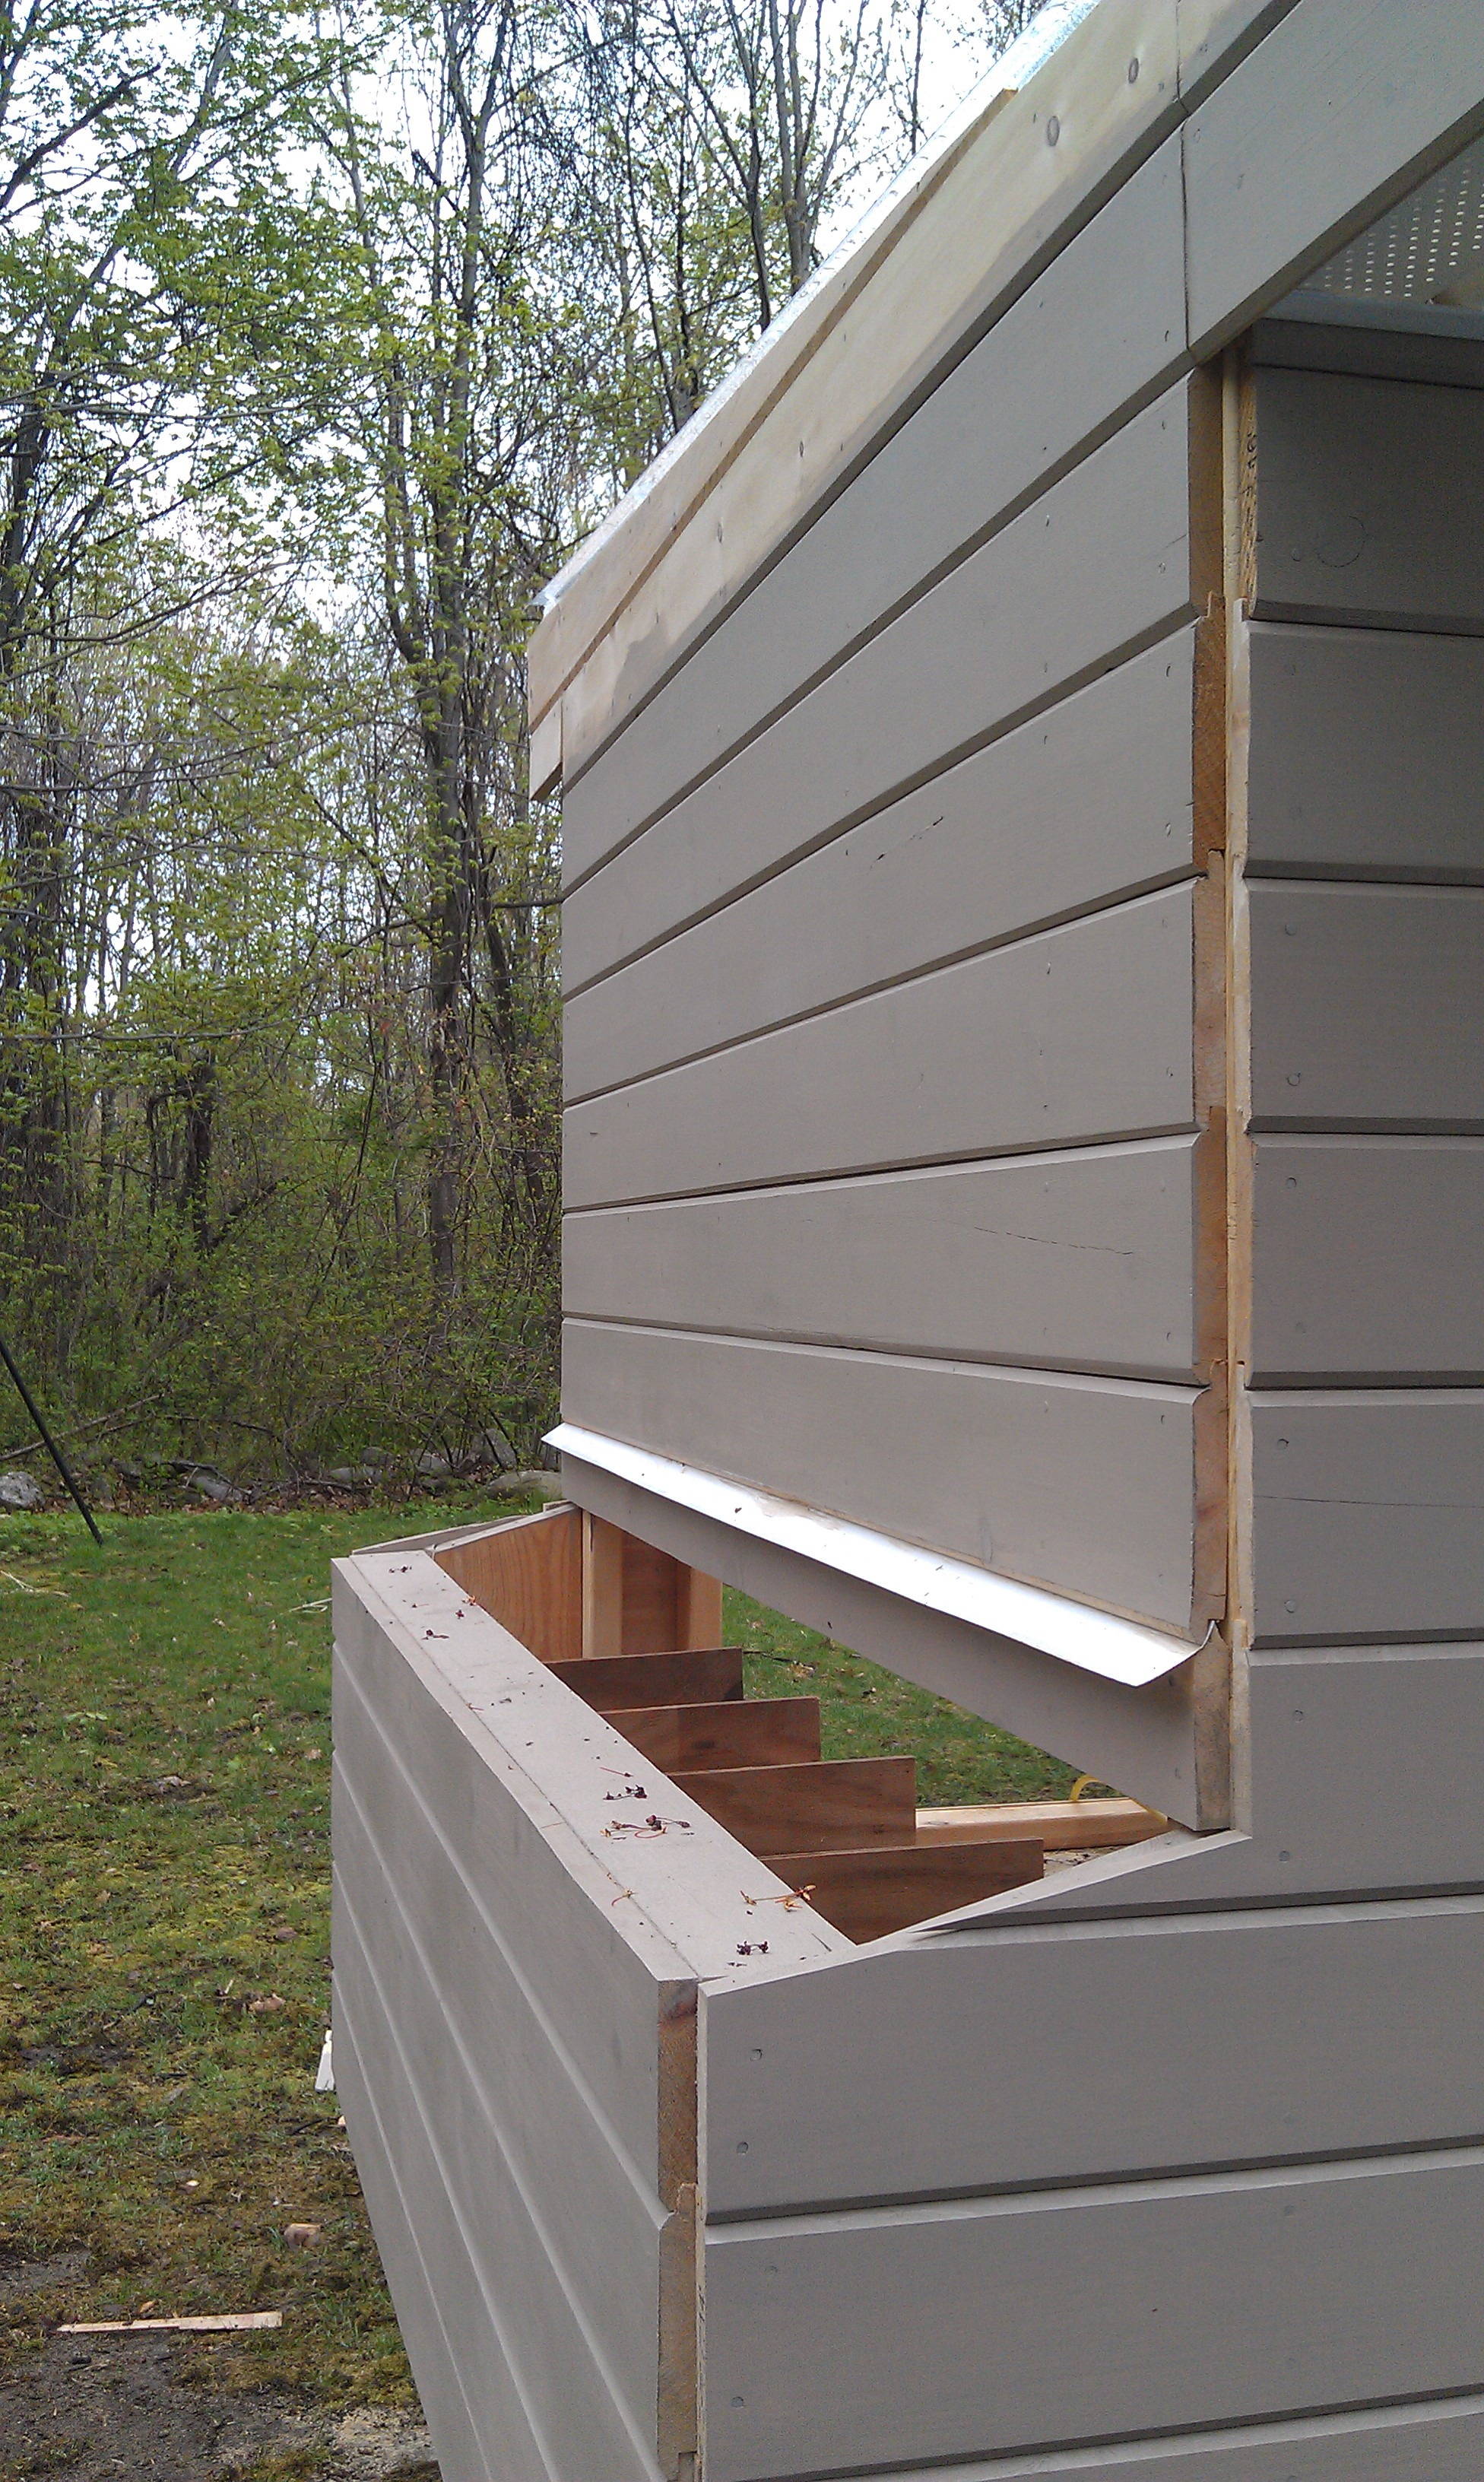 This is the back of the coop. What you are seeing is our nesting boxes for the chickens.